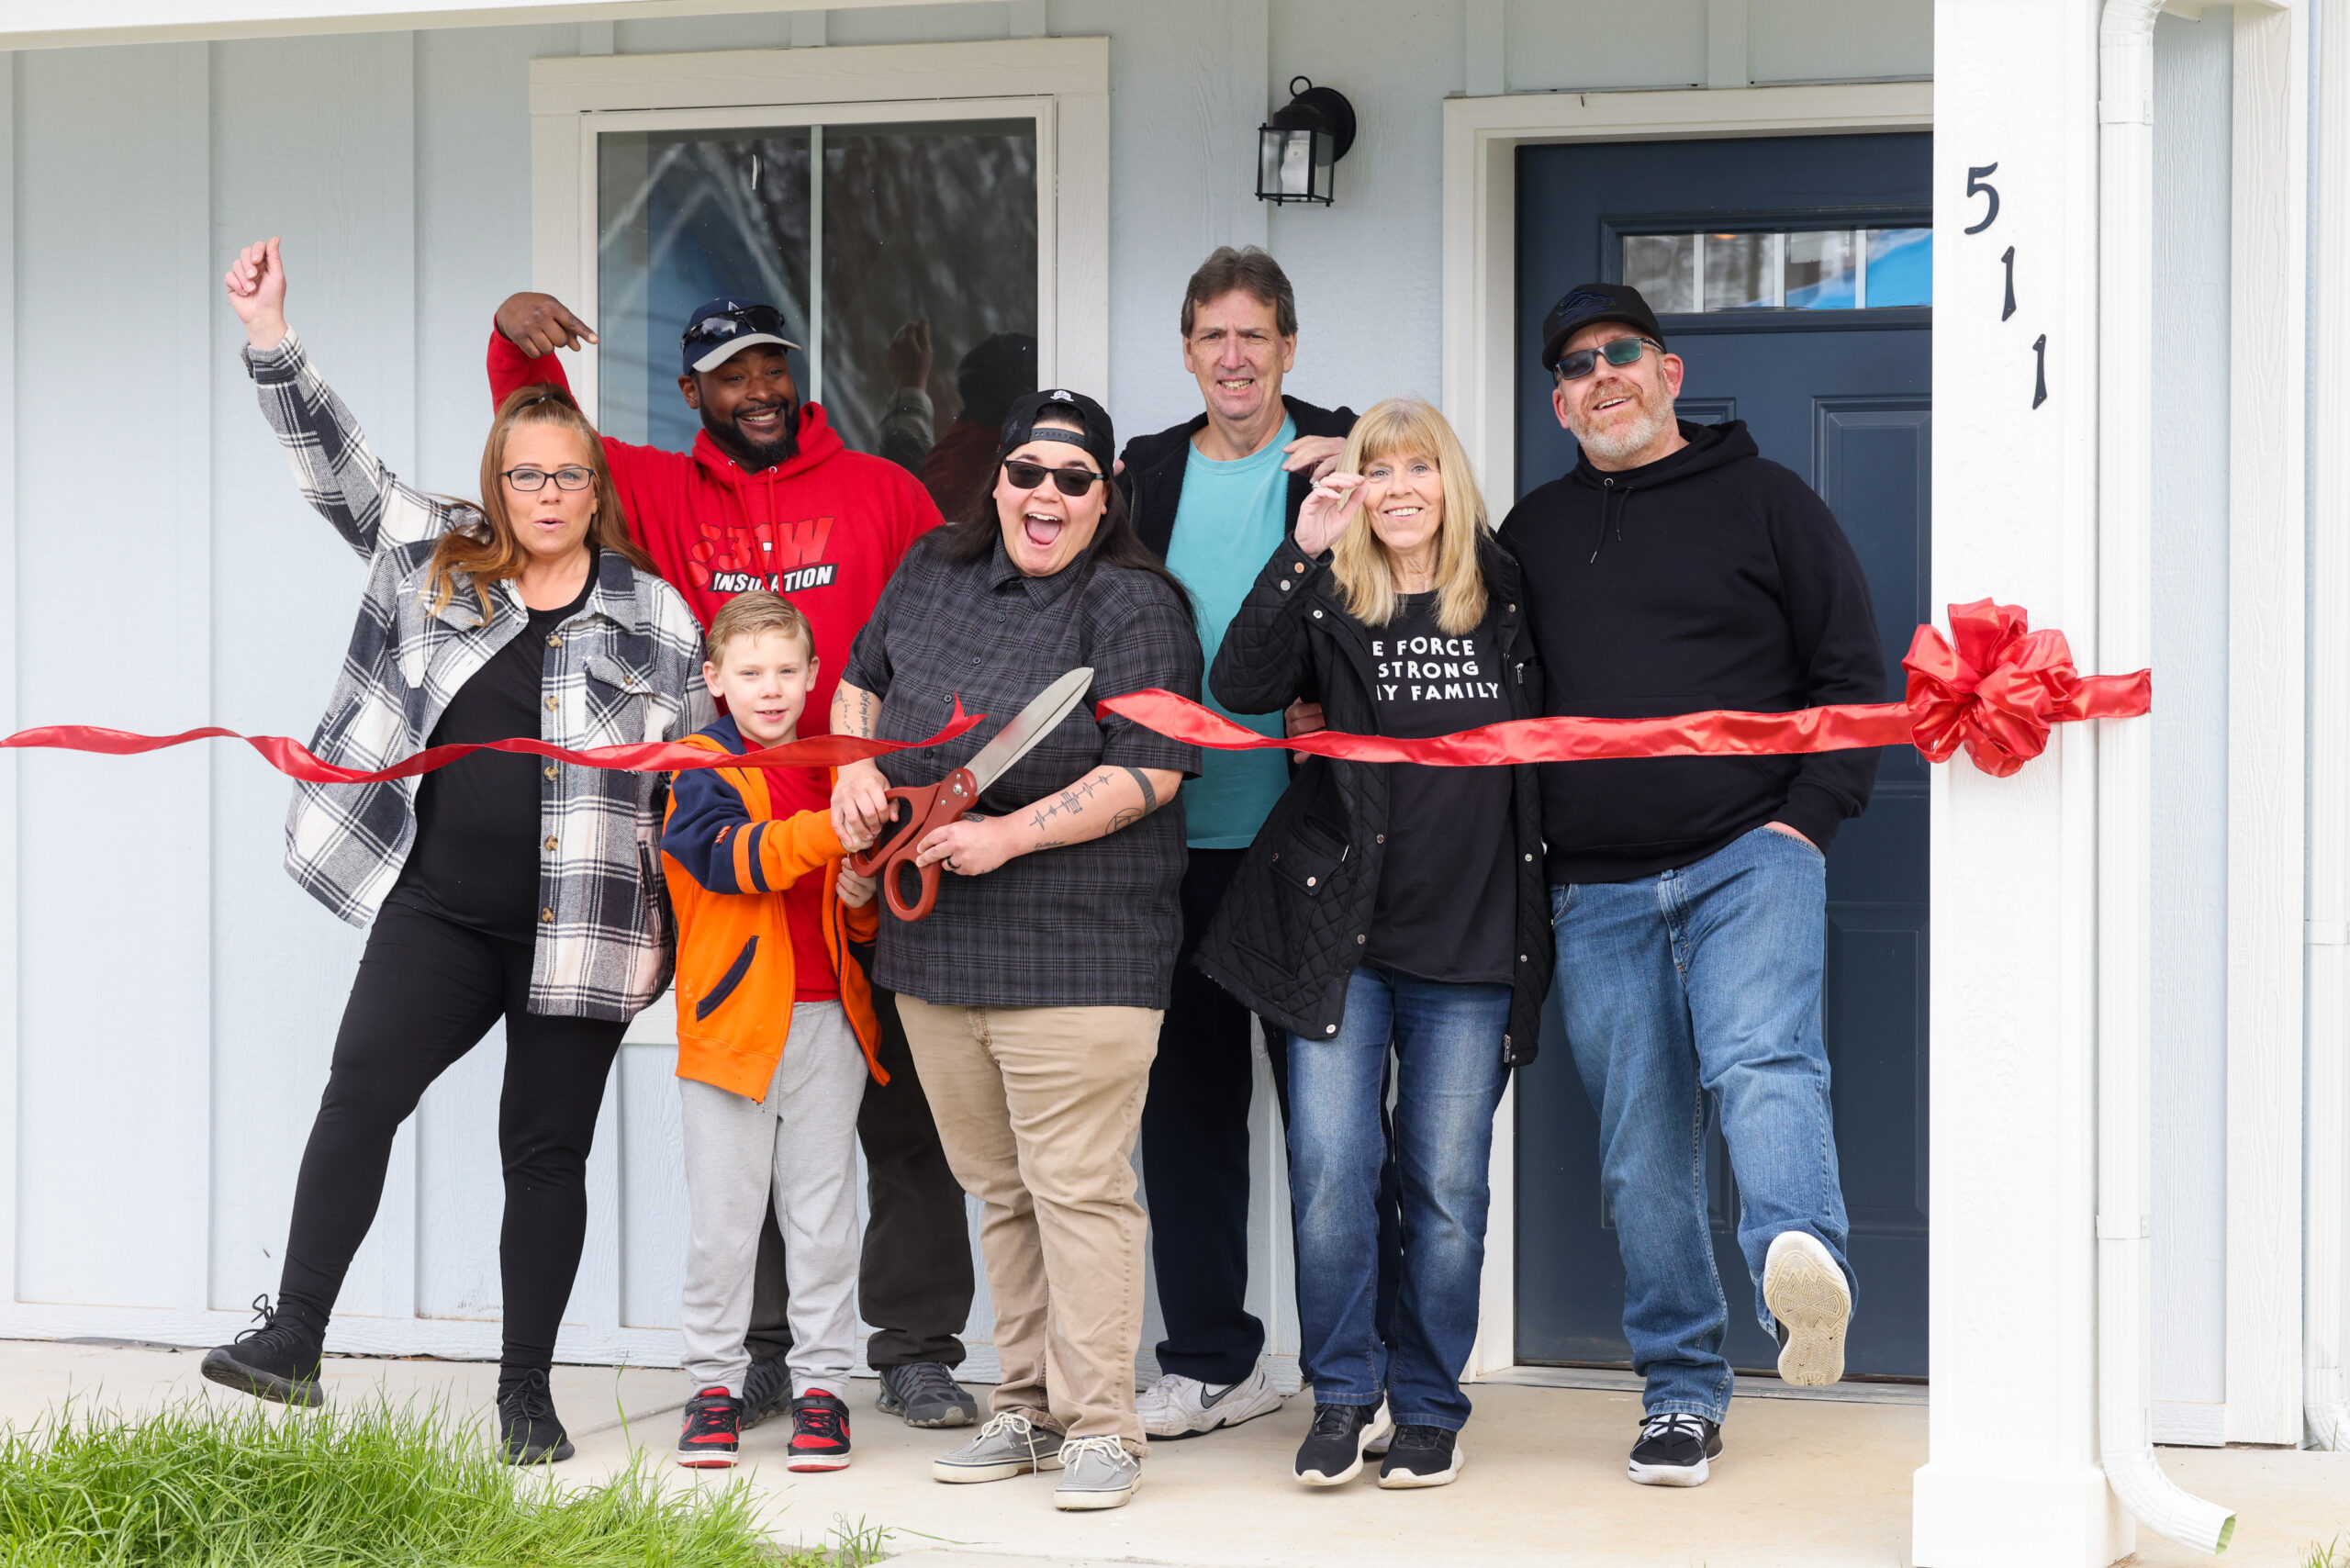 Opening a new Habitat for Humanity house